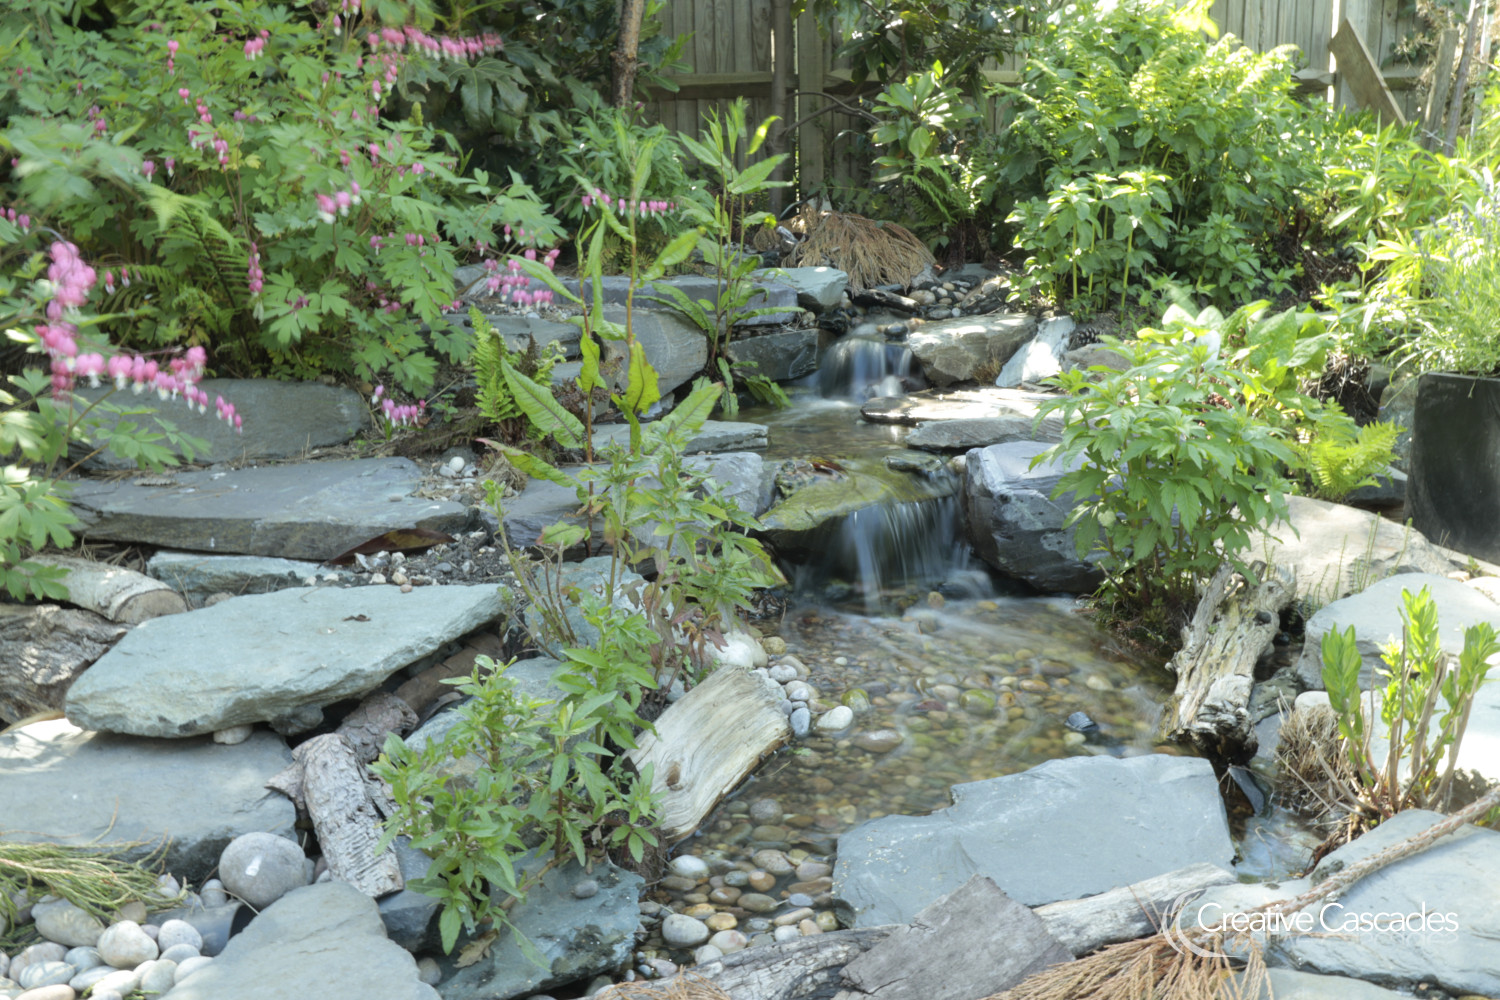 Ferns and other shady plants begin colonising the slate rocks  - Landscaping and Water Features -  Creative Cascades